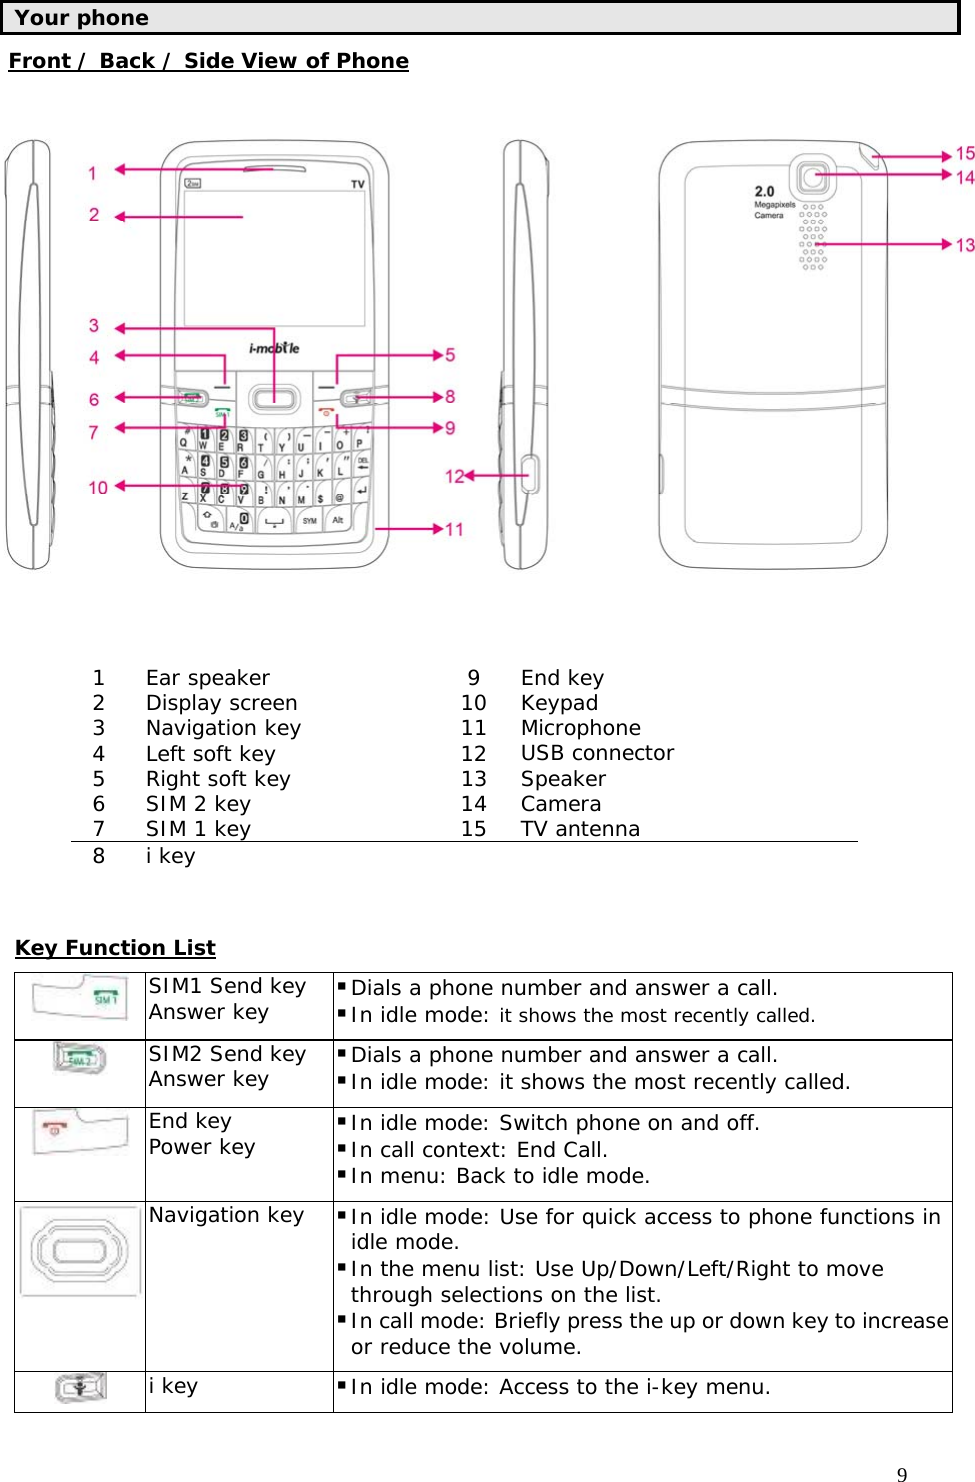                                     9 Your phone Front / Back / Side View of Phone                 1 Ear speaker  9 End key 2 Display screen  10 Keypad 3 Navigation key    11 Microphone 4 Left soft key  12 USB connector 5  Right soft key  13 Speaker 6  SIM 2 key    14  Camera 7 SIM 1 key  15 TV antenna 8 i key       Key Function List  SIM1 Send key  Answer key   Dials a phone number and answer a call.  In idle mode: it shows the most recently called.   SIM2 Send key  Answer key   Dials a phone number and answer a call.  In idle mode: it shows the most recently called.   End key  Power key   In idle mode: Switch phone on and off.  In call context: End Call.  In menu: Back to idle mode.   Navigation key   In idle mode: Use for quick access to phone functions in idle mode.  In the menu list: Use Up/Down/Left/Right to move through selections on the list.  In call mode: Briefly press the up or down key to increase or reduce the volume.   i key   In idle mode: Access to the i-key menu.  